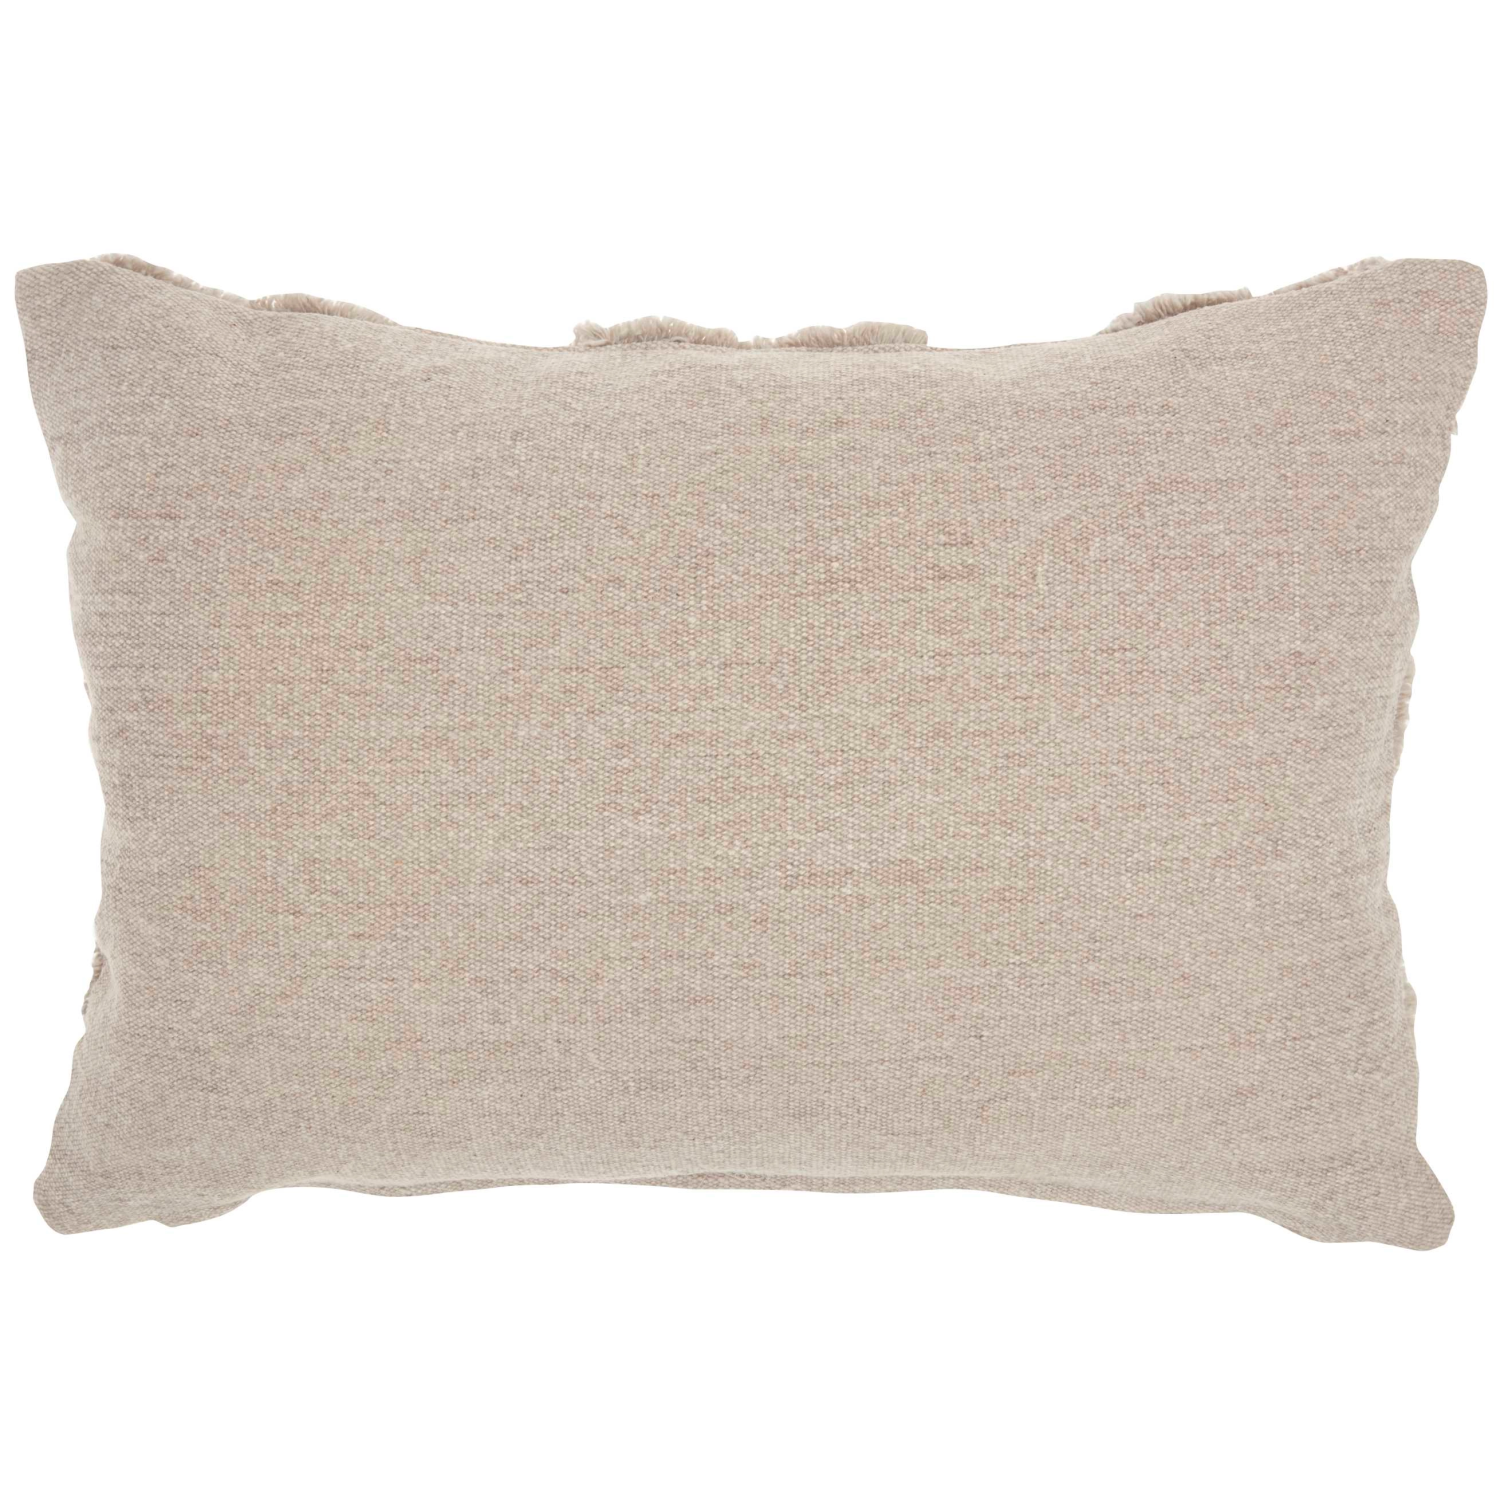 Lifestyle Accent Pillow Khaki Image of Backside of Pillow